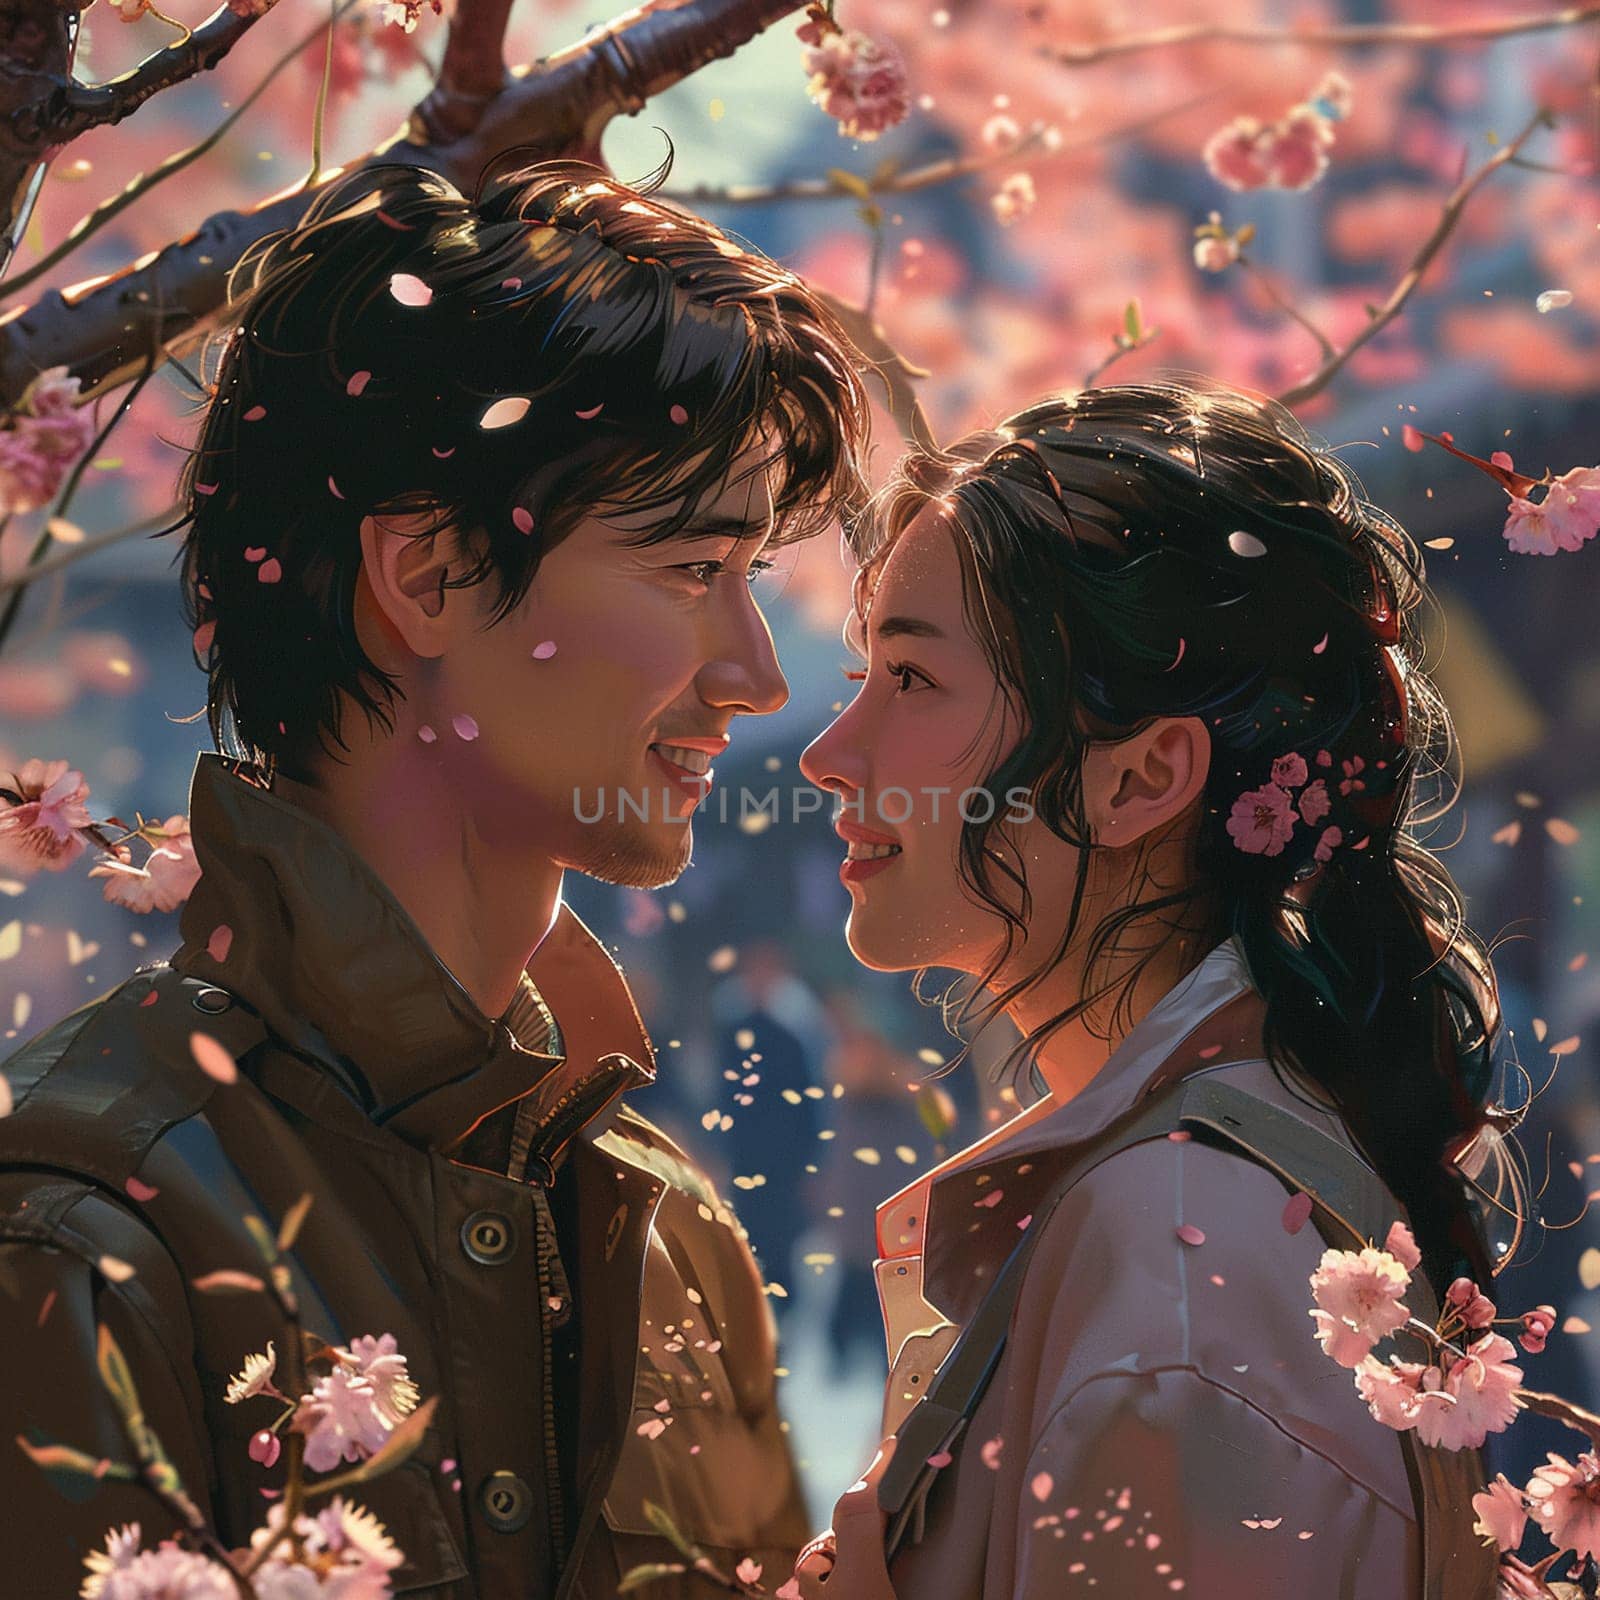 Intimate moment under cherry blossoms, illustrated in a soft, romanticized anime style.